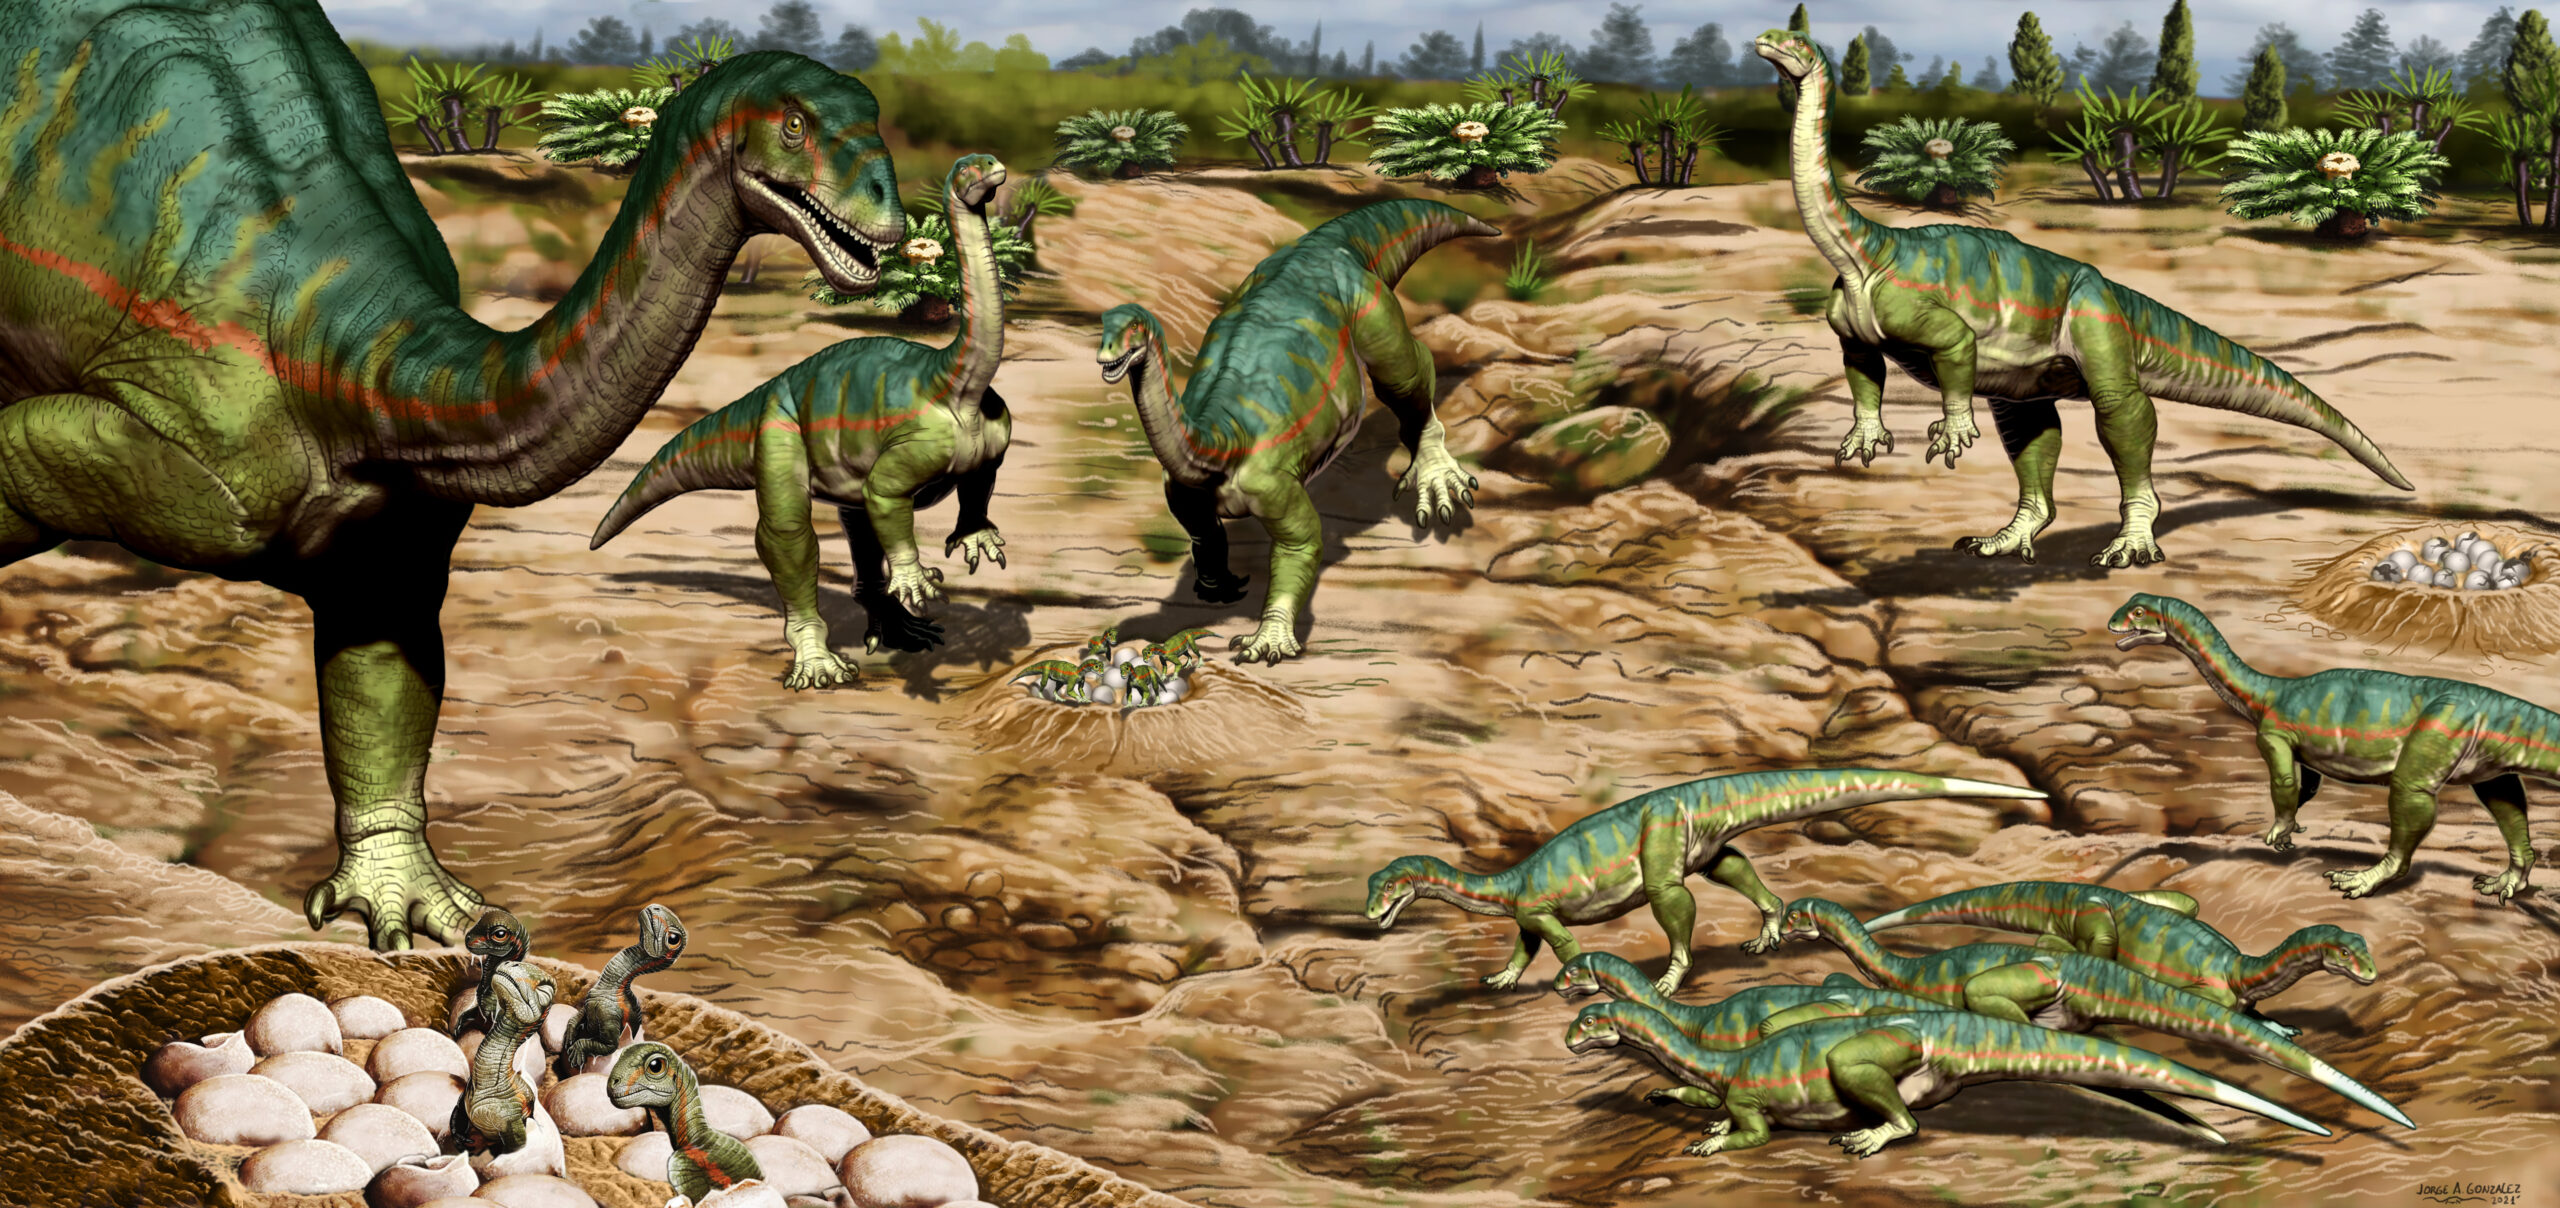 Evidence from a fossil site in Patagonia suggests that early dinosaurs liked in herds, which may have helped them thrive. 